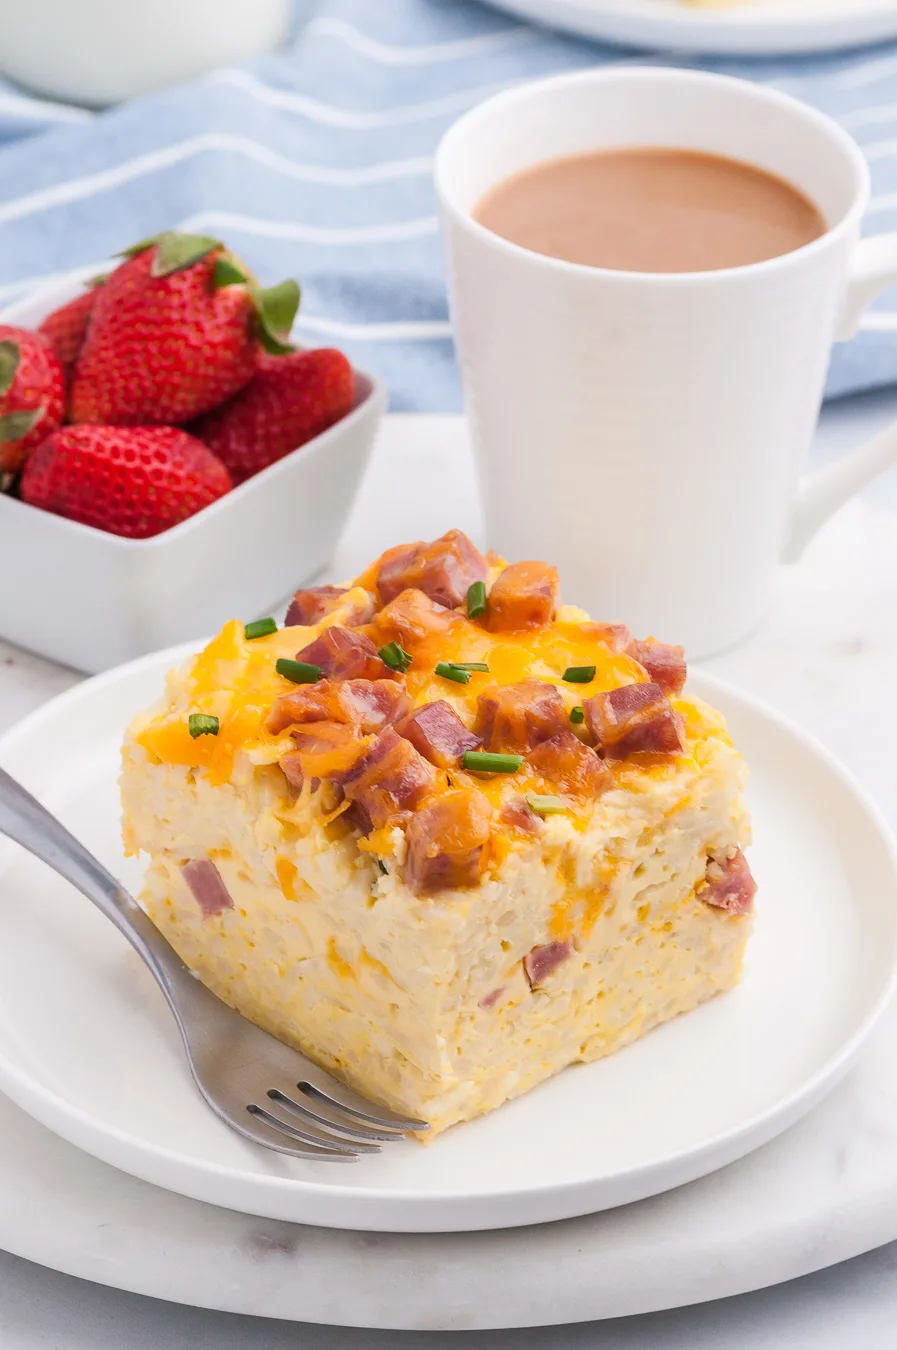 brunch casserole with ham and cheddar cheese made in the slow cooker. Serving placed on a plate and served next to coffee mug and fresh strawberries.